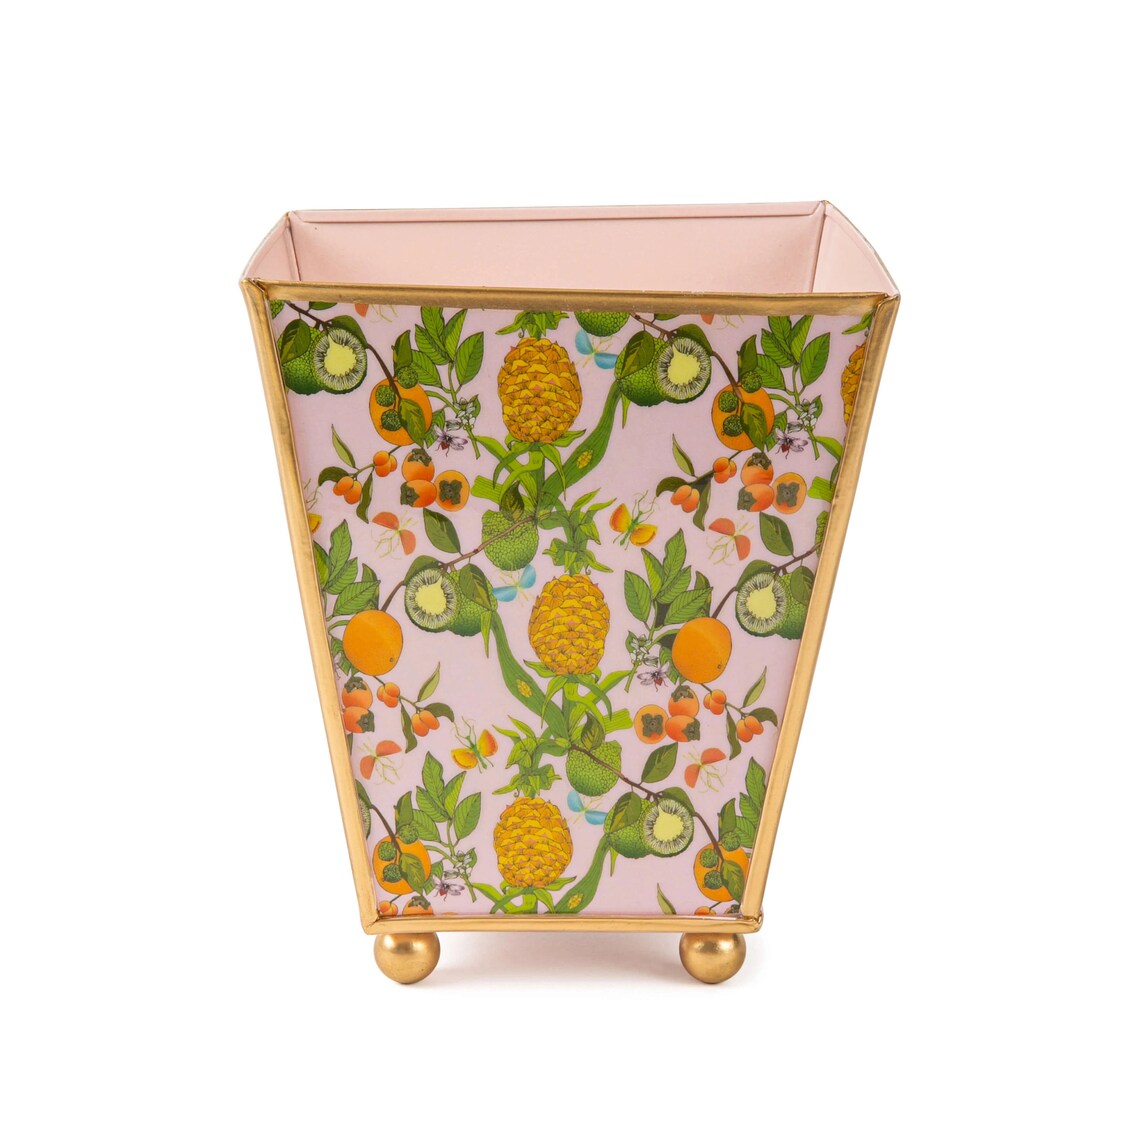 Make a statement with our Enameled Square Cachepot Planter, a playful yet practical table centerpiece. Decked out in a vibrant palette and a fruity motif of pineapples, limes, and oranges, this cachepot is trimmed in gold for that extra sparkle. Whether you're looking to brighten up your office desk, kitchen counter, or dining table, it offers a splash of spring and summer all year round. Versatile and visually stunning, it’s the centerpiece that brings your tablescape ideas to life.